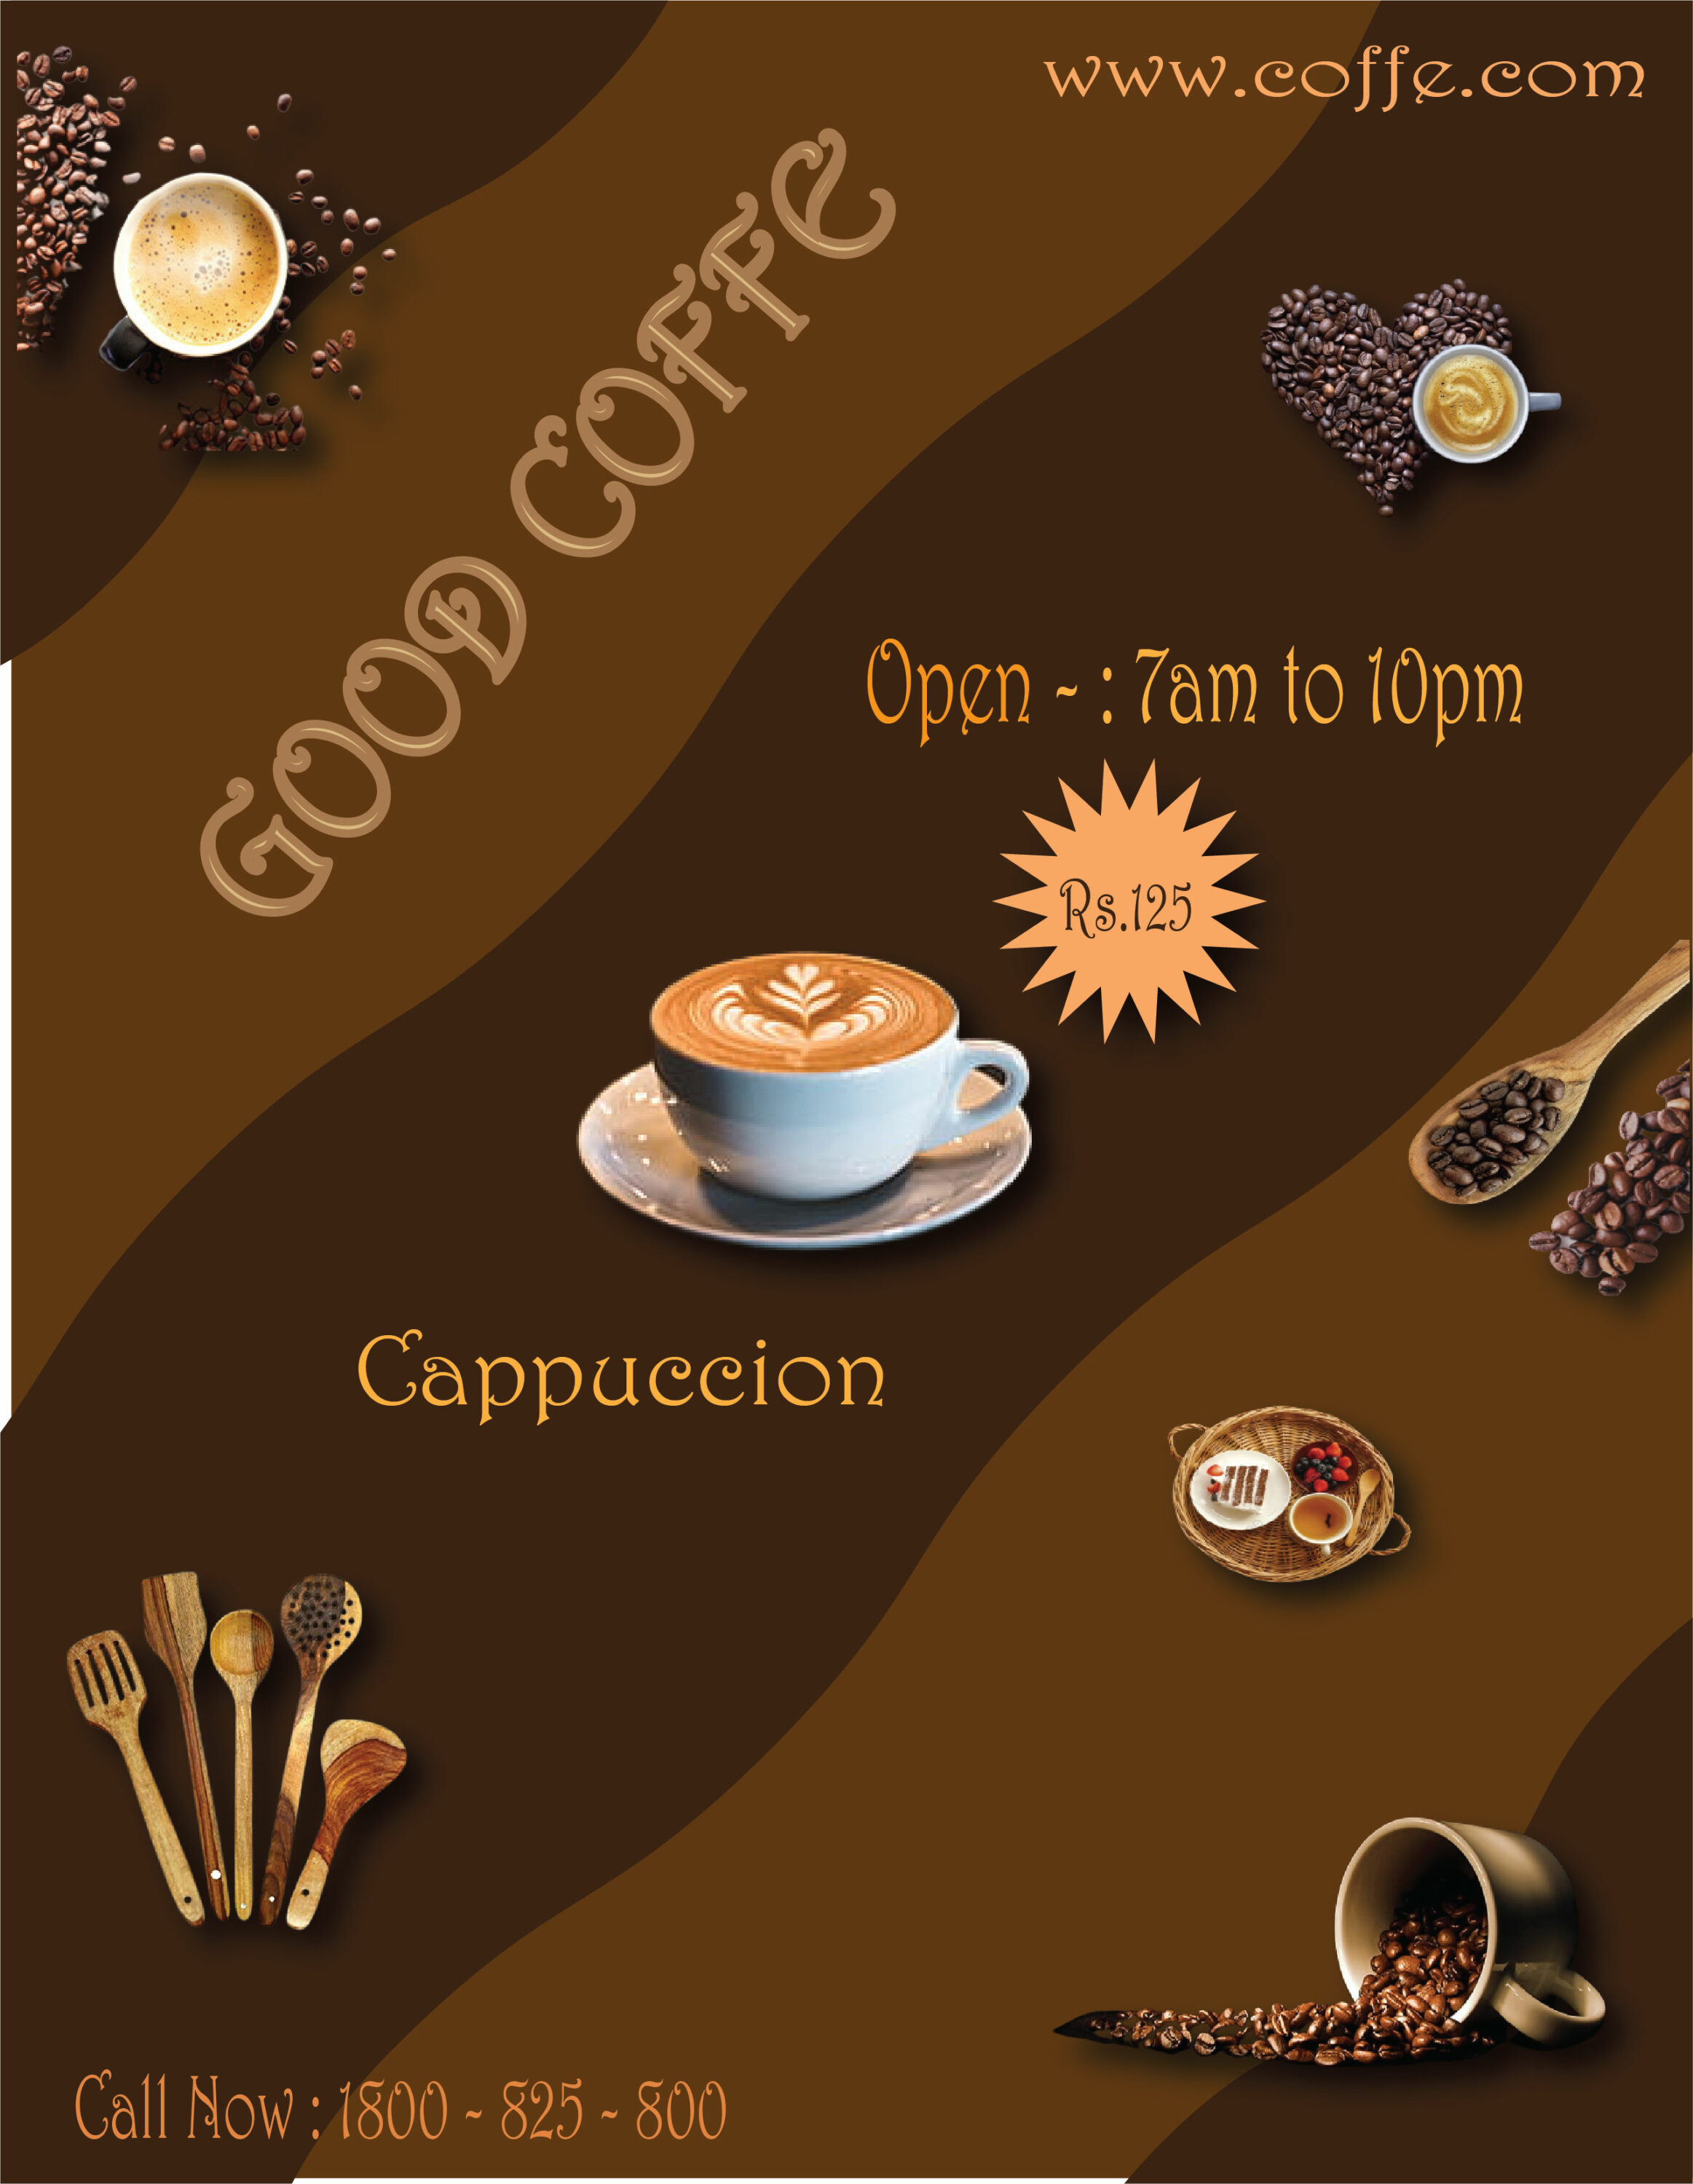 Coffee Poster Design example.